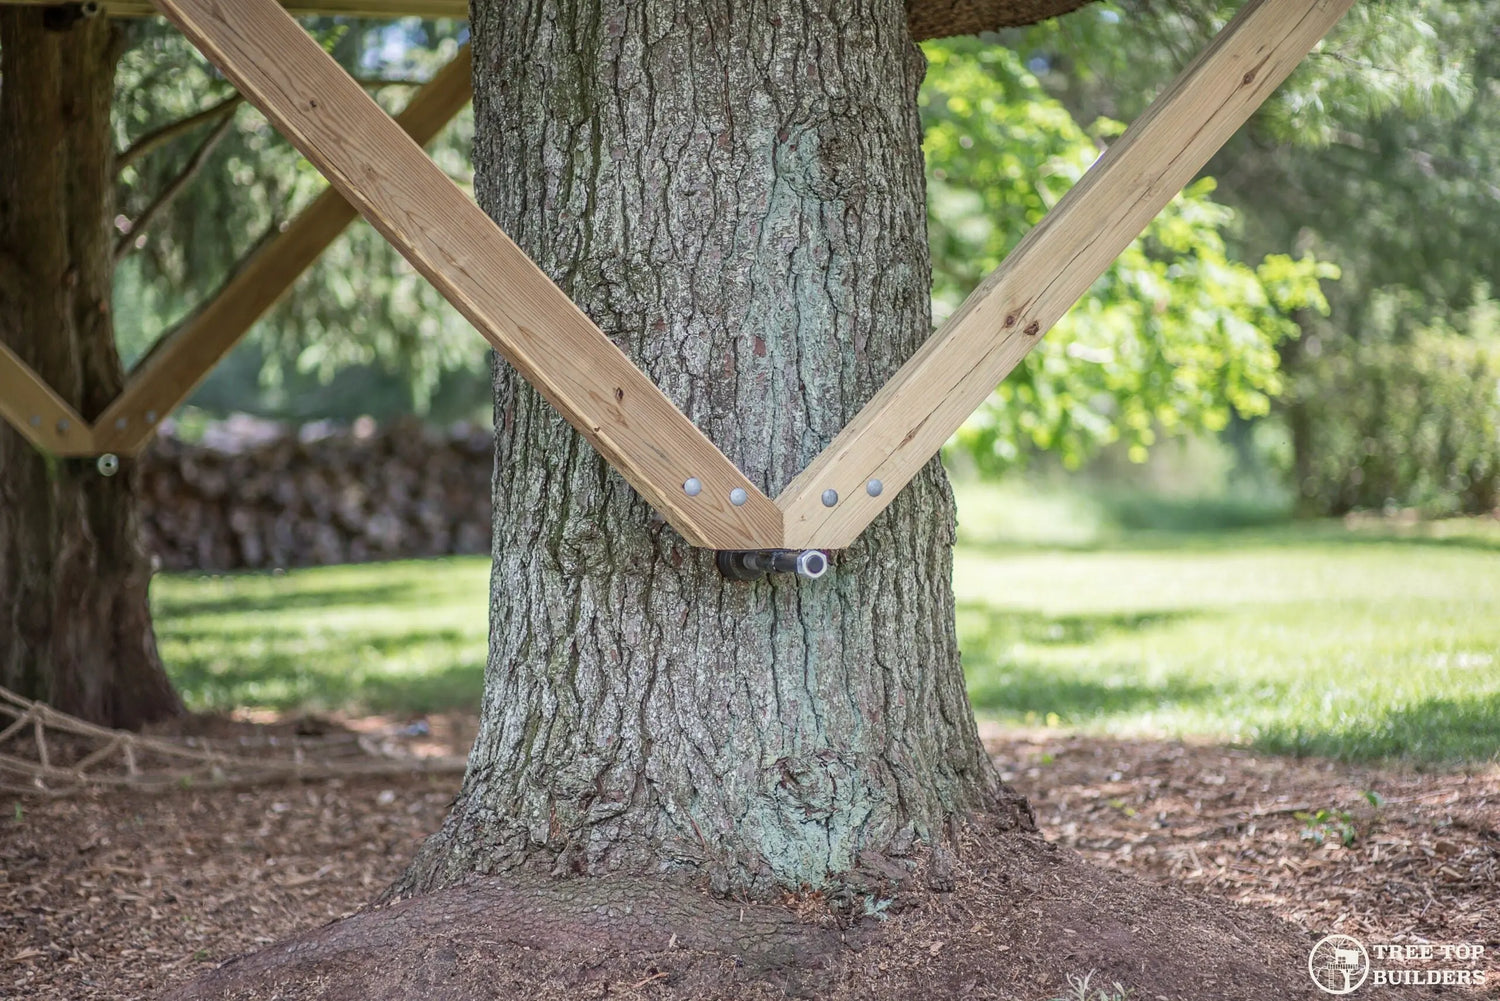 Bolts and Brackets, Preventing Treehouse Damage